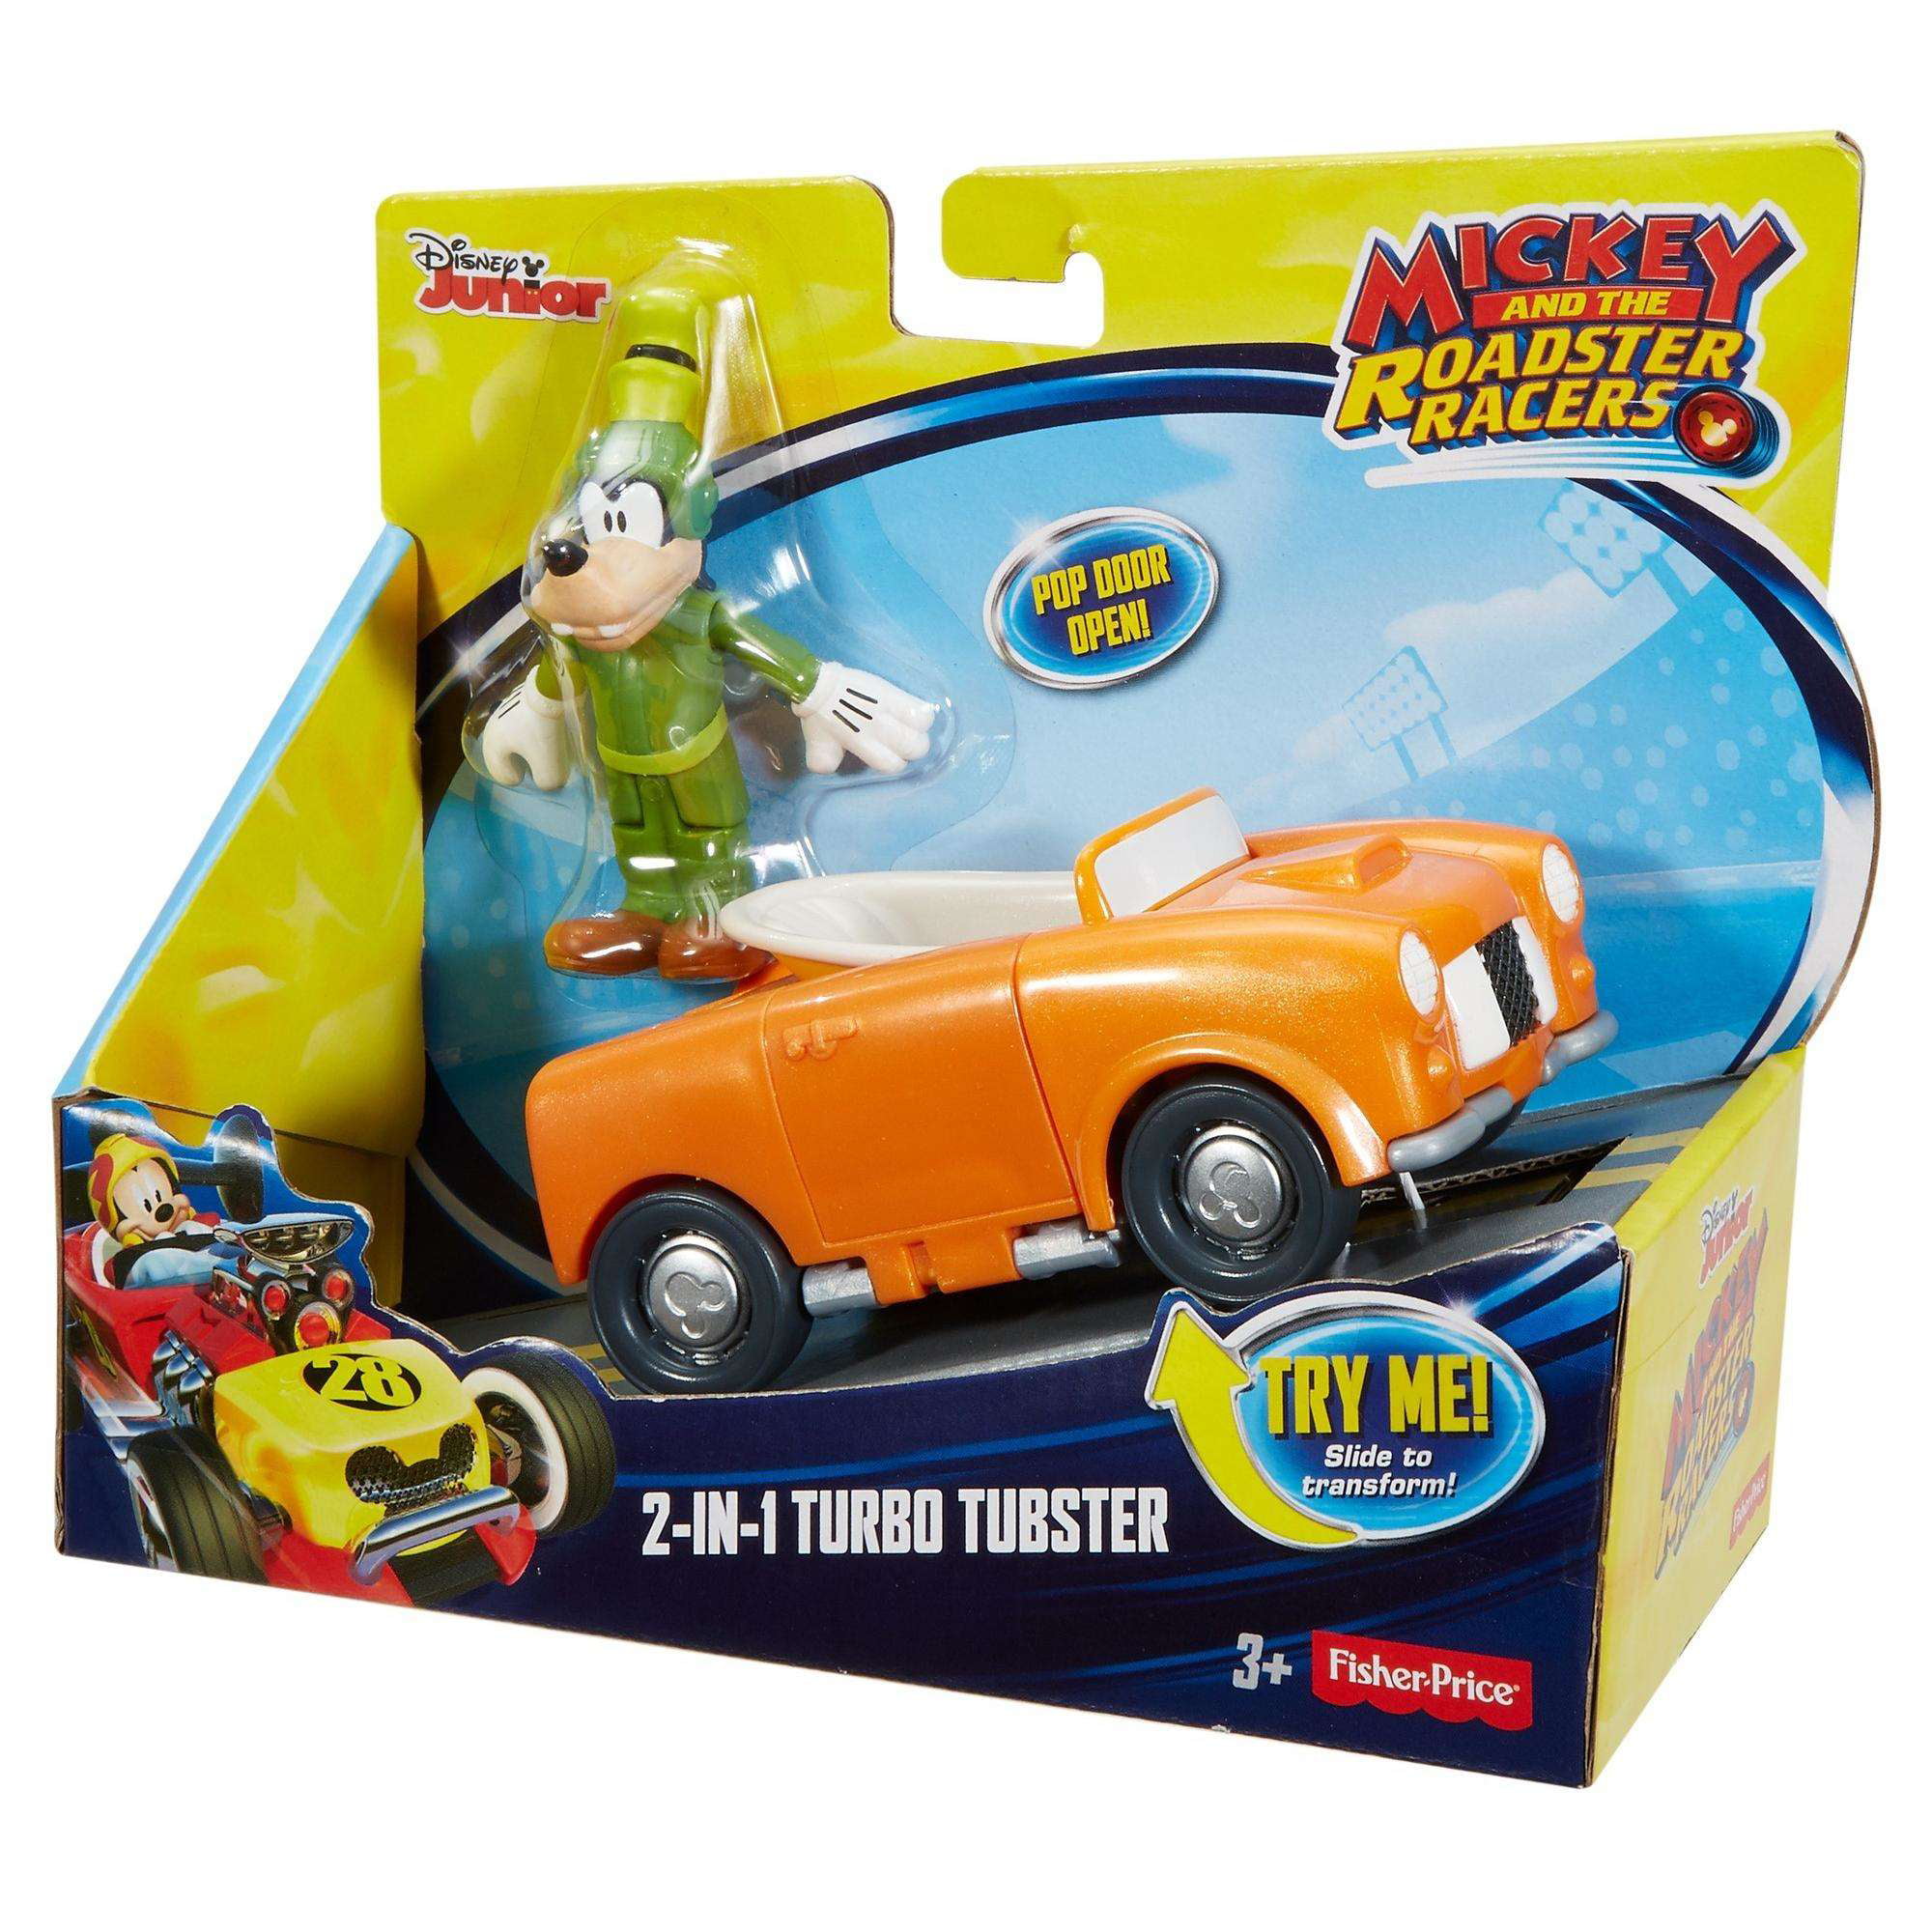 Mickey and the Roadster Racers Goofy Roadster Turbo Tubster neu OVP 